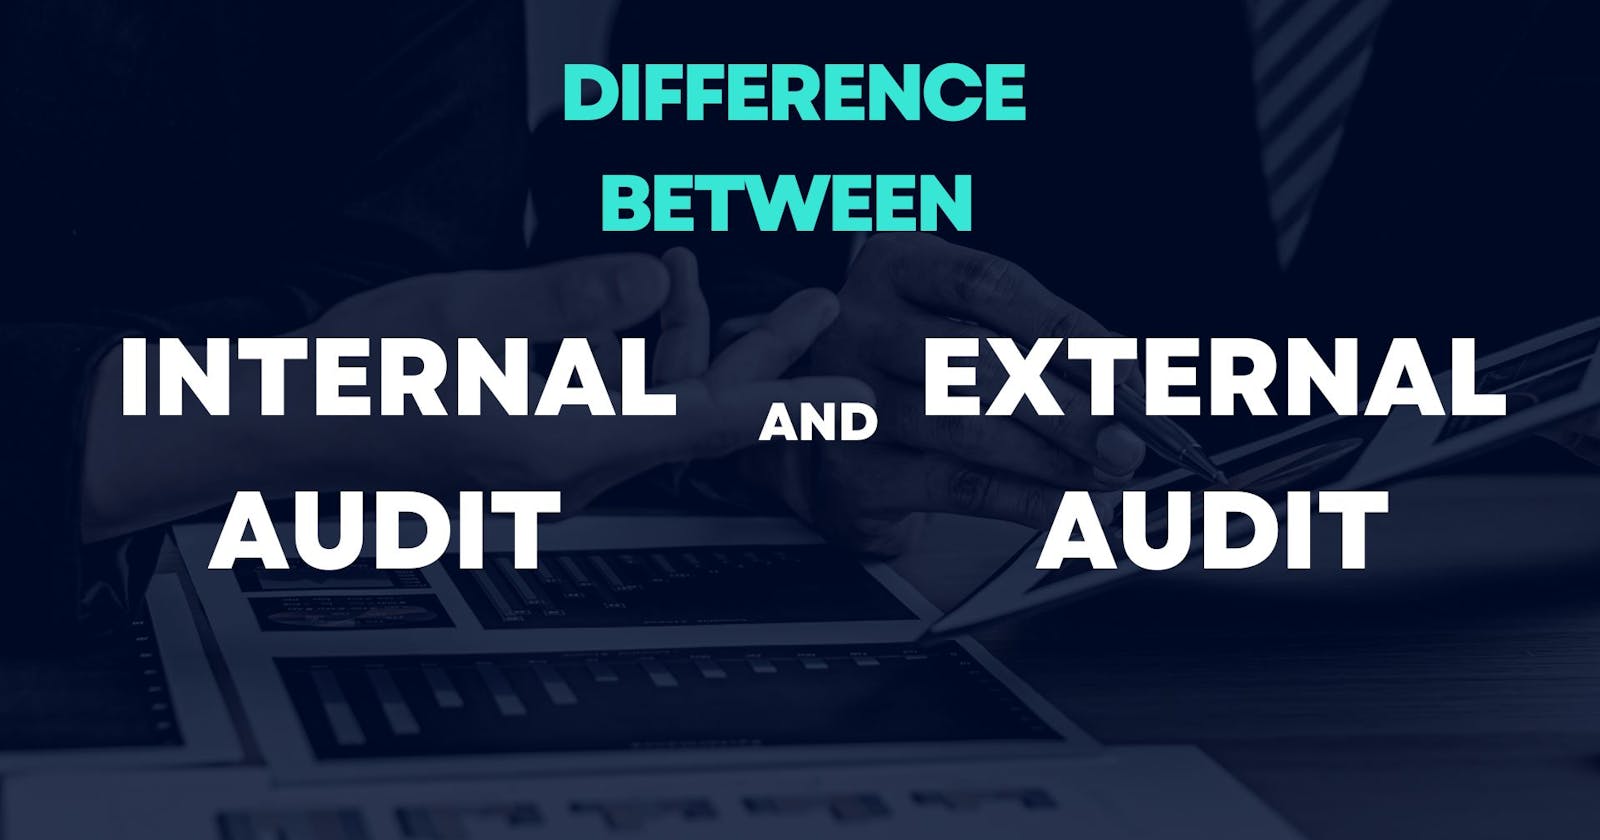 Difference between internal audit and external audit